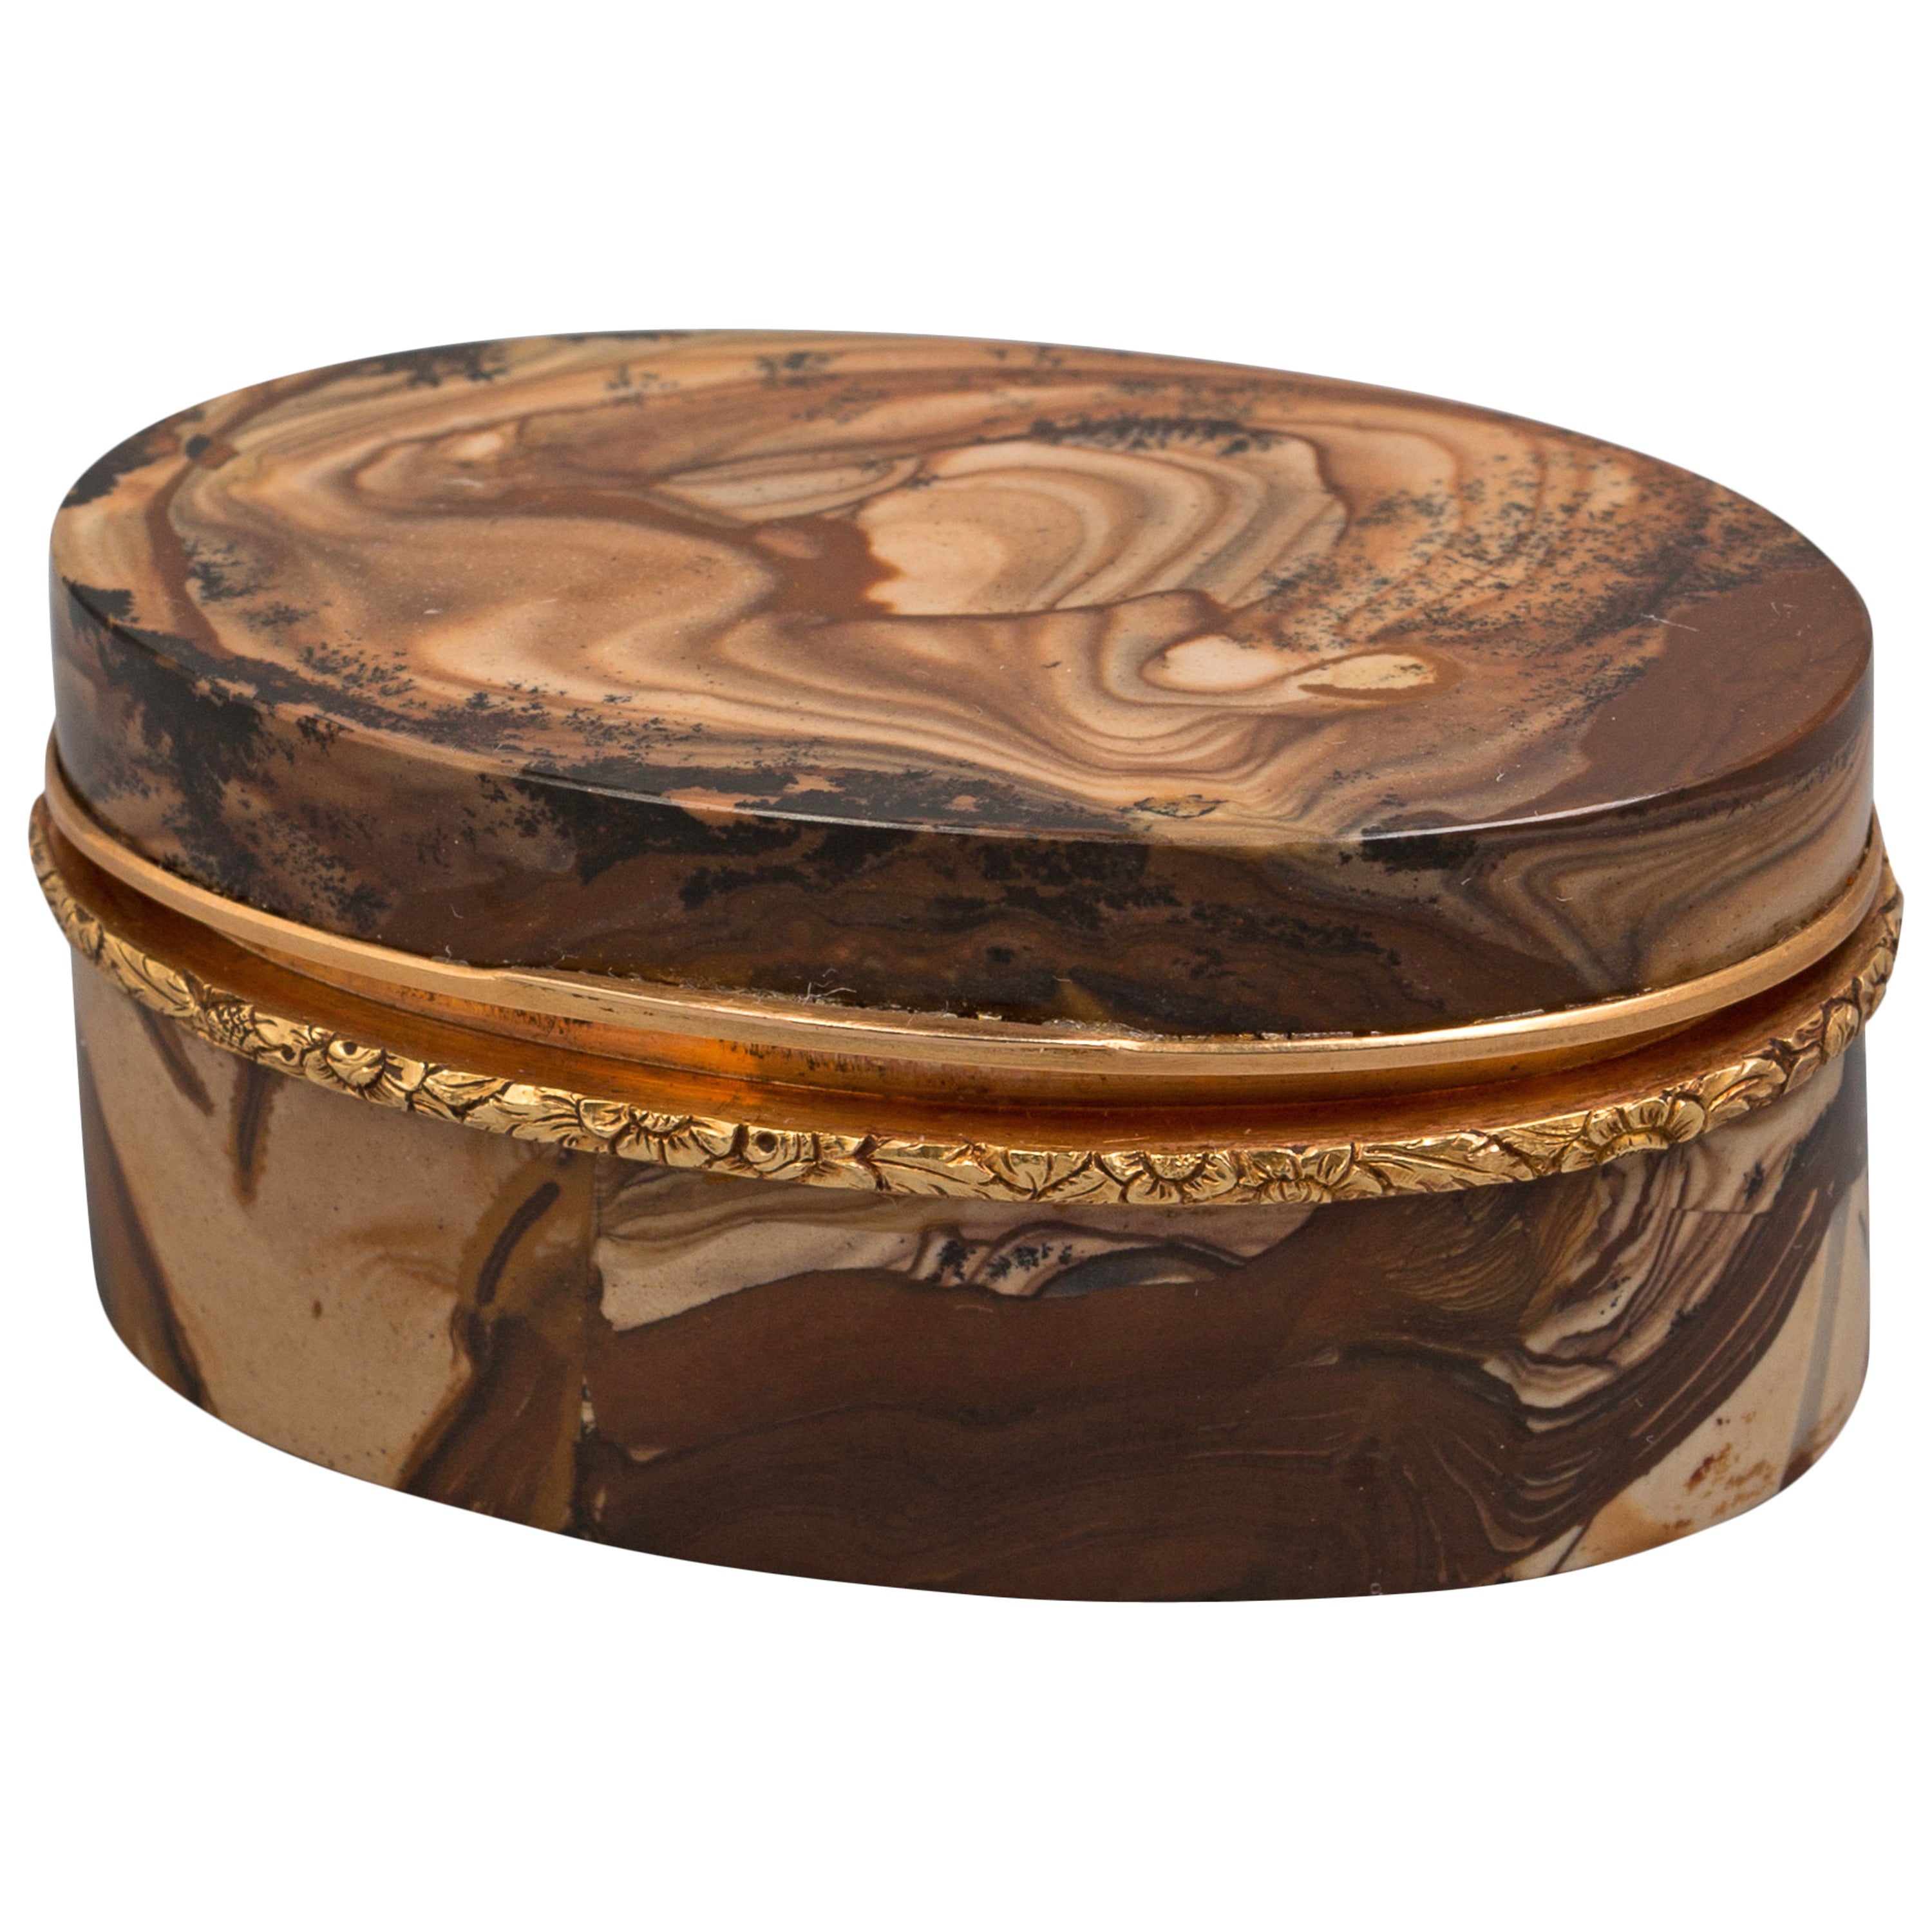 Gold-Mounted Agate Box, German, 18th Century For Sale